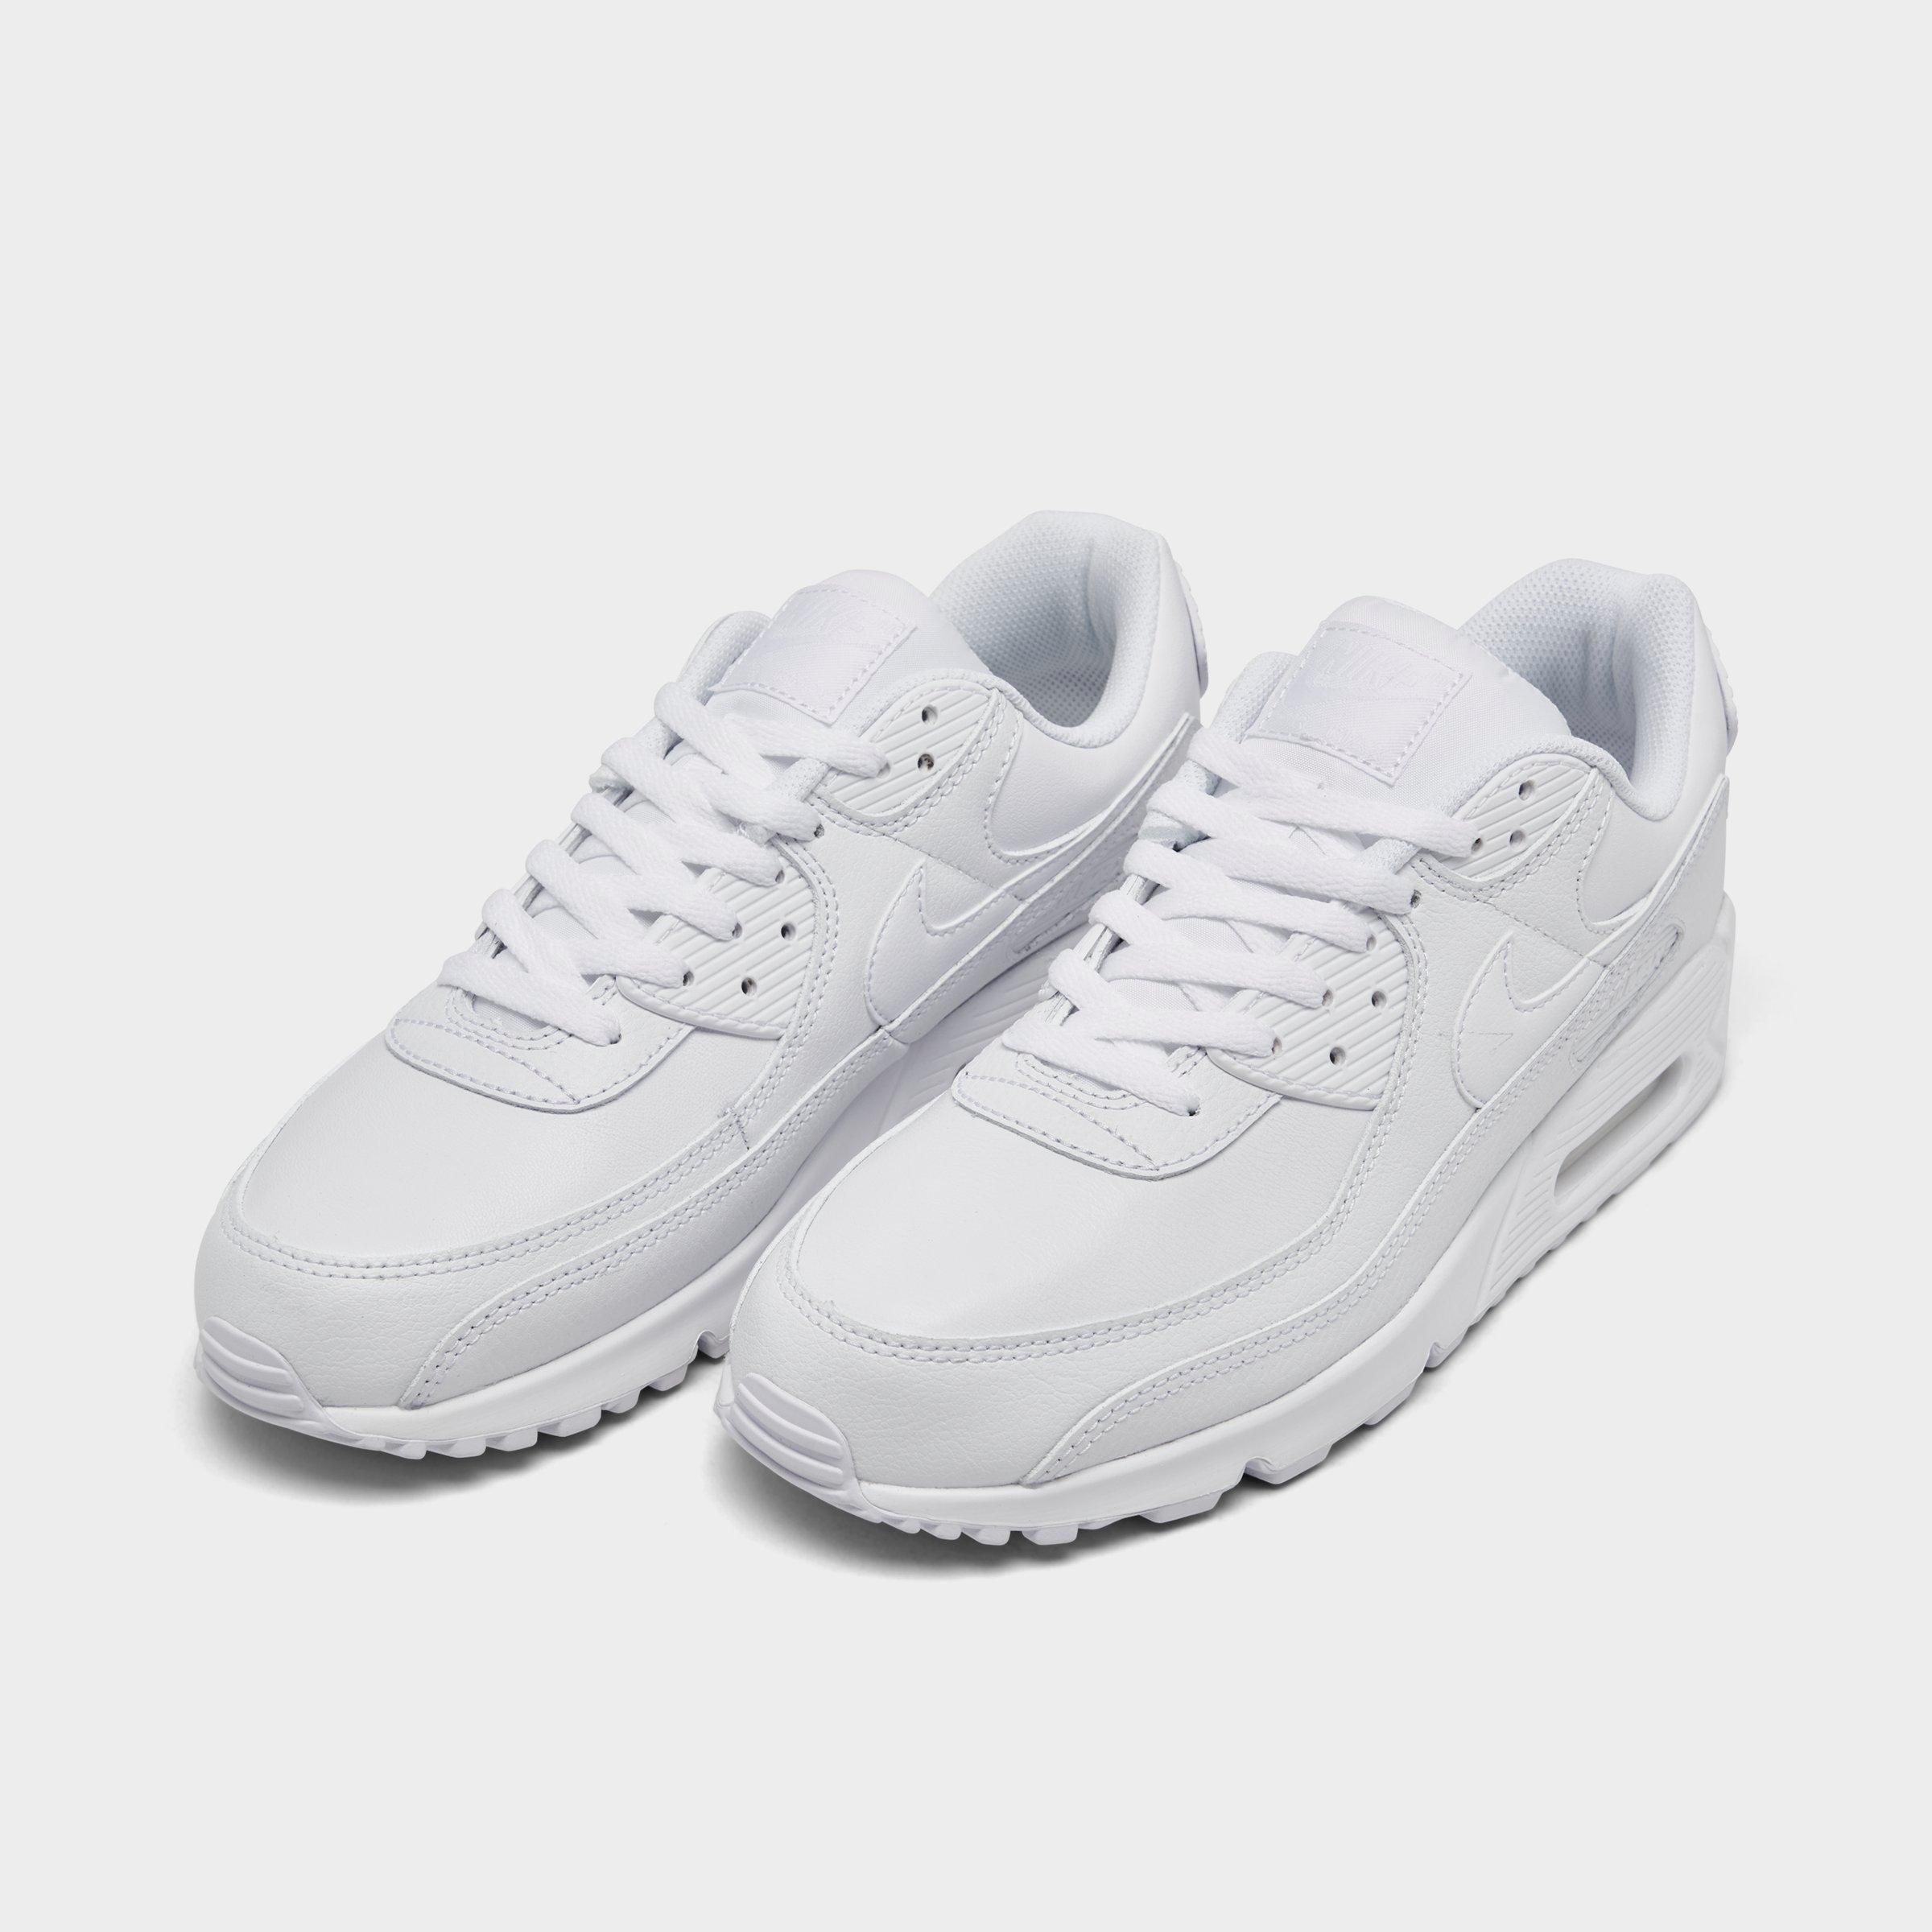 air max 90 white leather